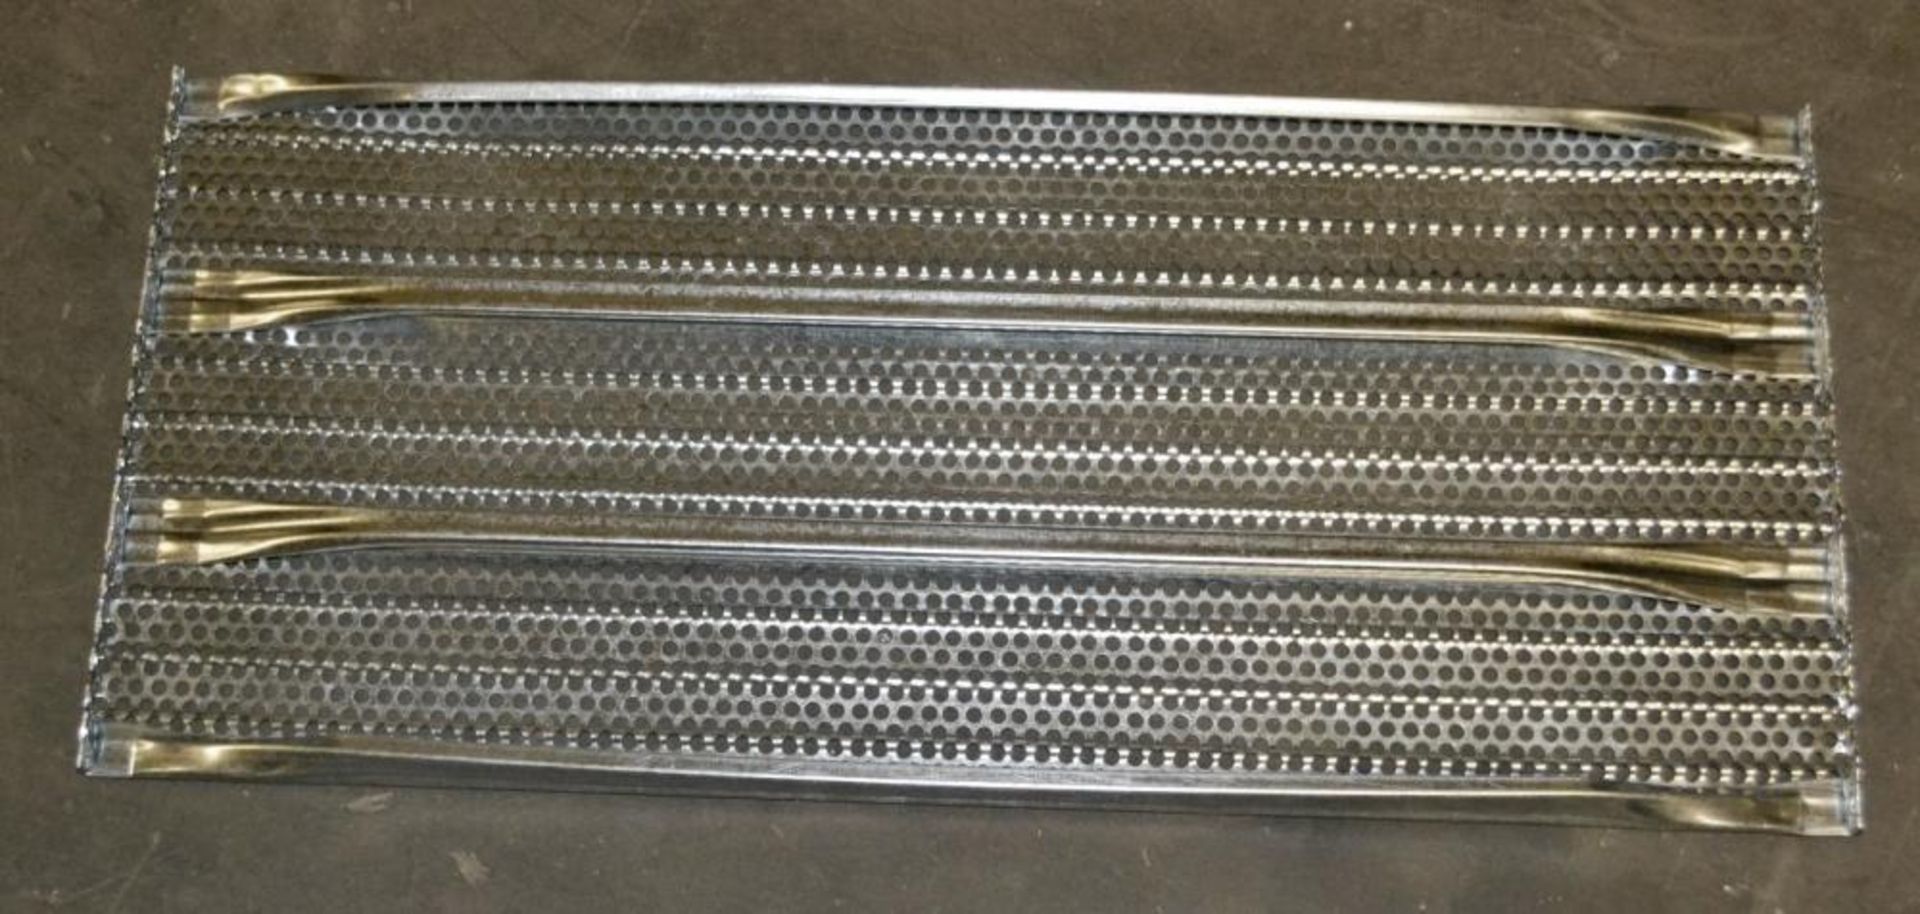 9 x Bays of Metalsistem Steel Modular Storage Shelving - Includes 58 Pieces - Recently Removed - Image 16 of 18